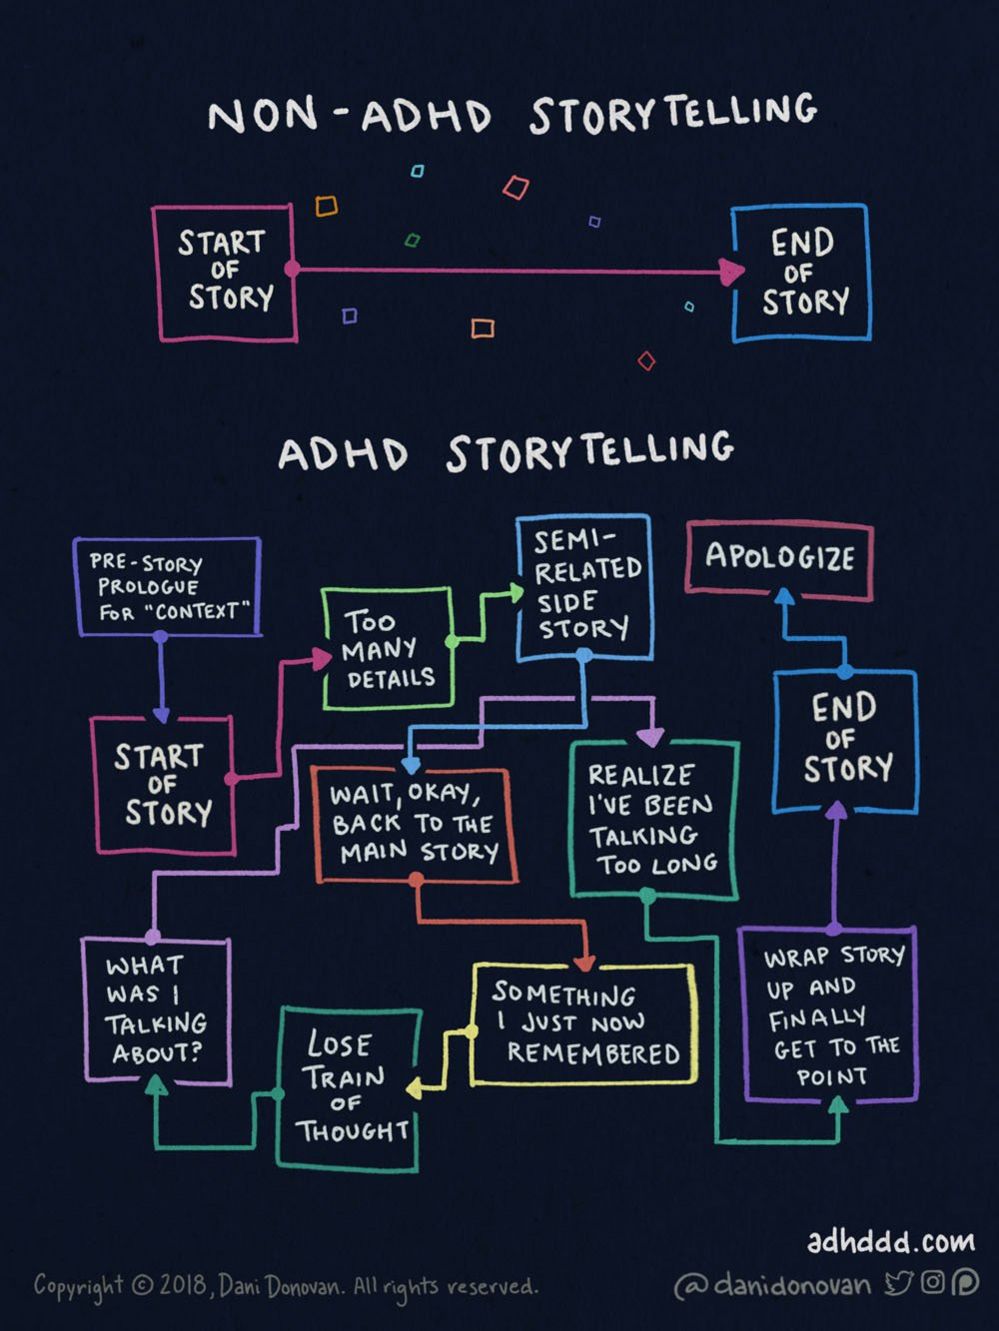 Flow chart split into two sections. First section, entitled 'Non ADHD Storytelling' shows a straight line between two boxes marked 'Start of Story' and 'End of Story'. Second section, entitled 'ADHD Storytelling' has a multitude of boxes including 'What was I talking about' and 'Lose train of thought' before the end of the story is eventually reached.